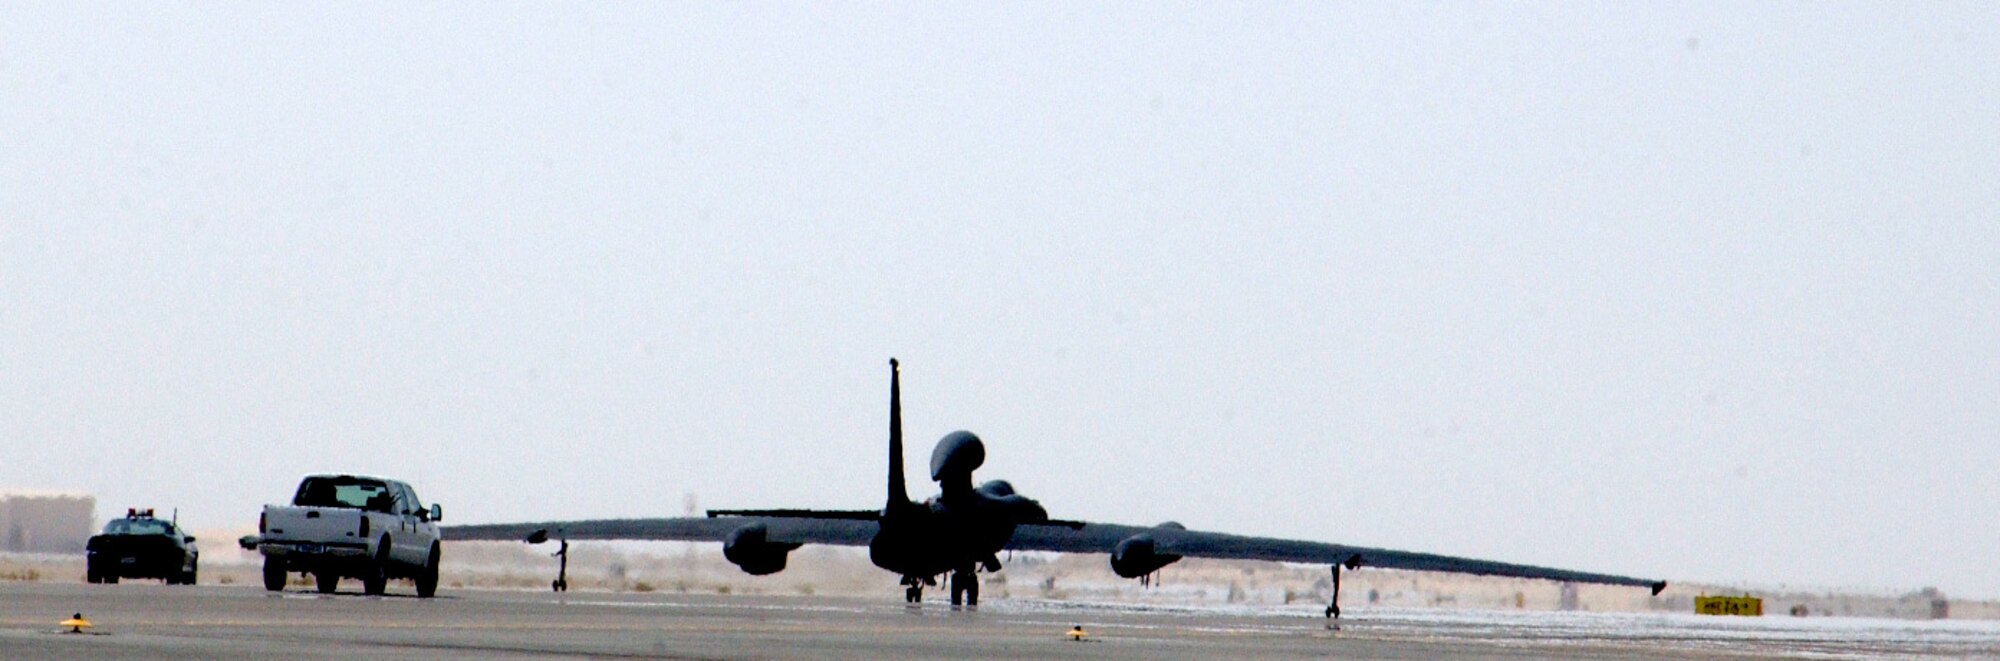 A U-2 piloted by Capt. Greg Hafner rolls toward takeoff followed by its chase car and other vehicles at a forward-operating base in Southwest Asia Sept. 5. The captain is assigned to the 99th Expeditionary Reconnaissance Squadron. (U.S. Air Force photo/Master Sgt. Jason Tudor)